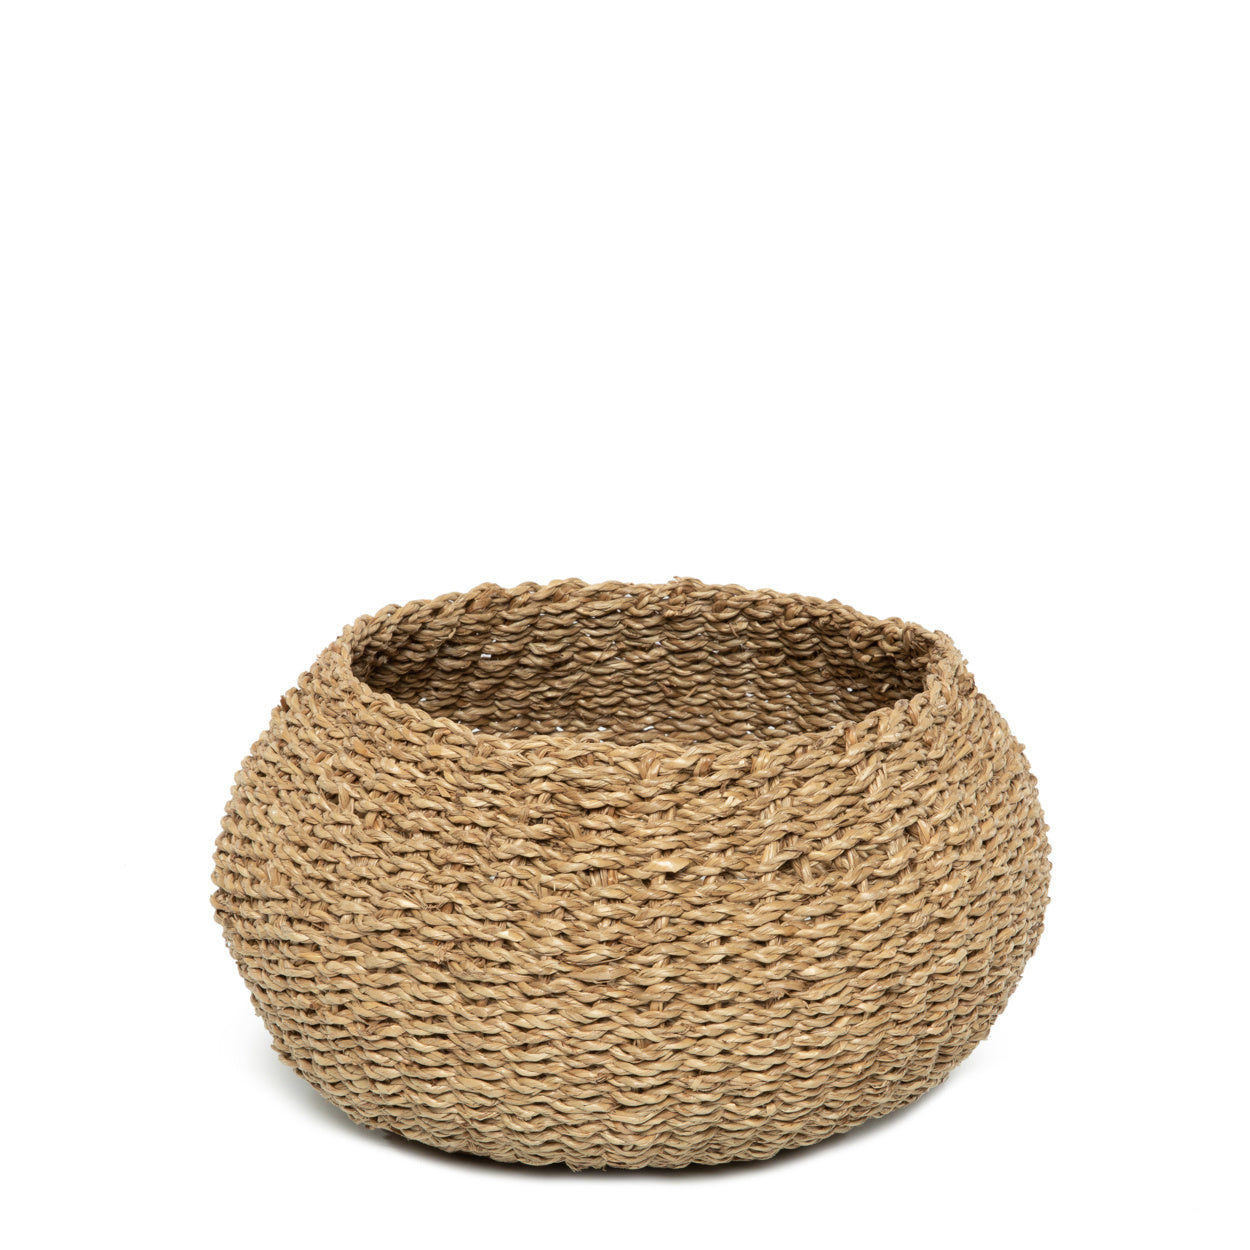 THE HO COC Baskets Set of 3 single basket front view